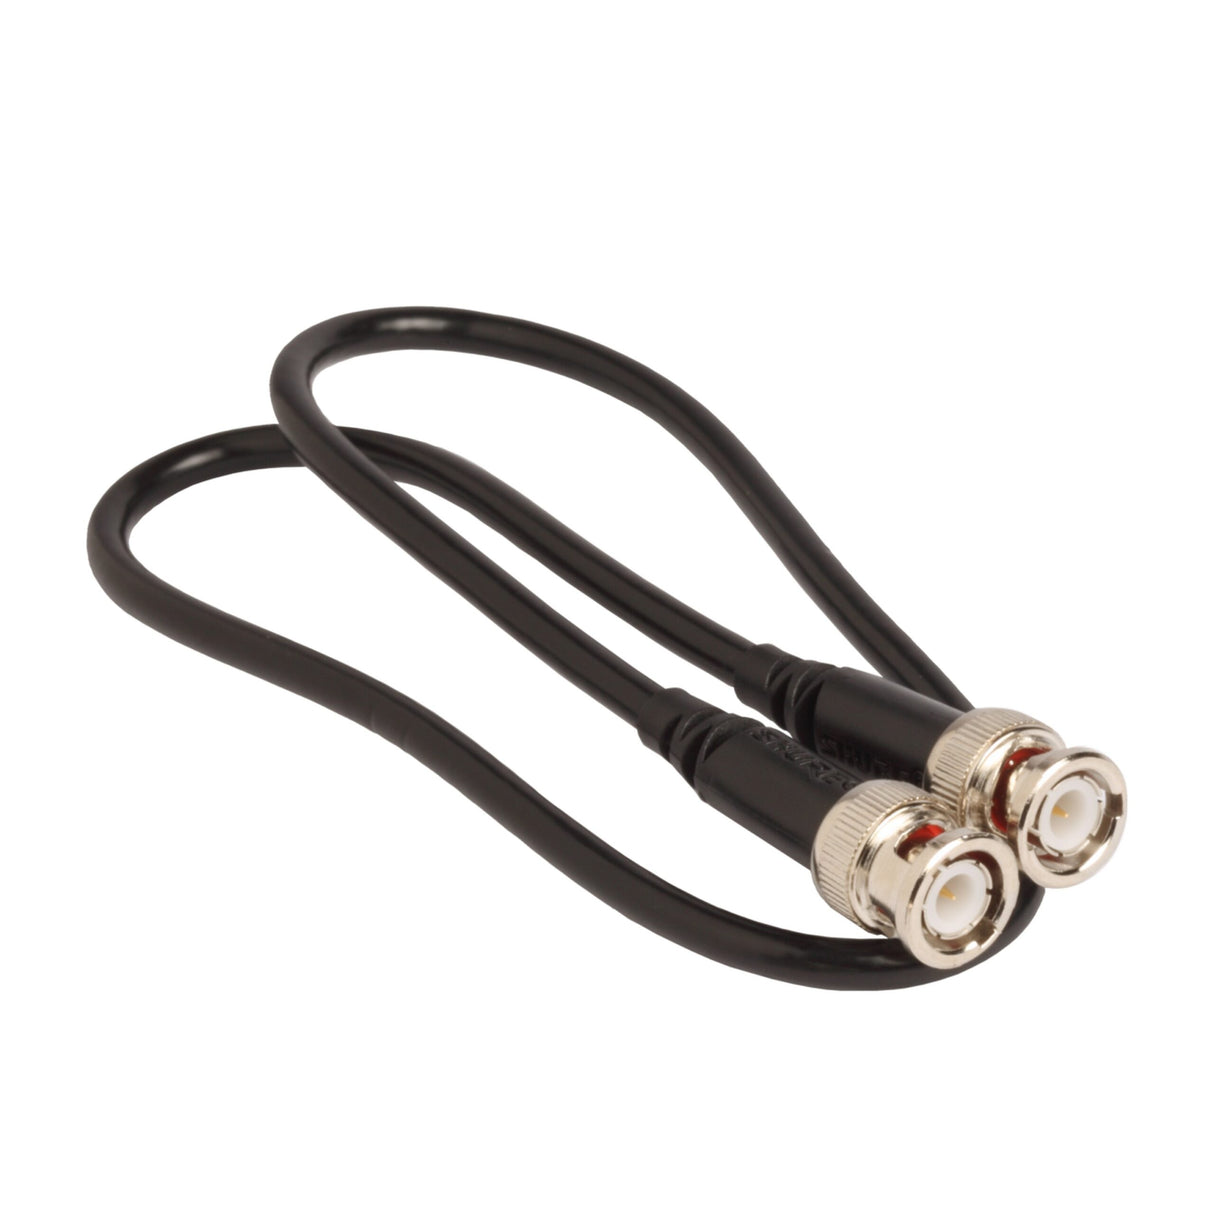 Shure 95F2035 Coaxial Cable Offers BNC to BNC Connection, 22-Inch